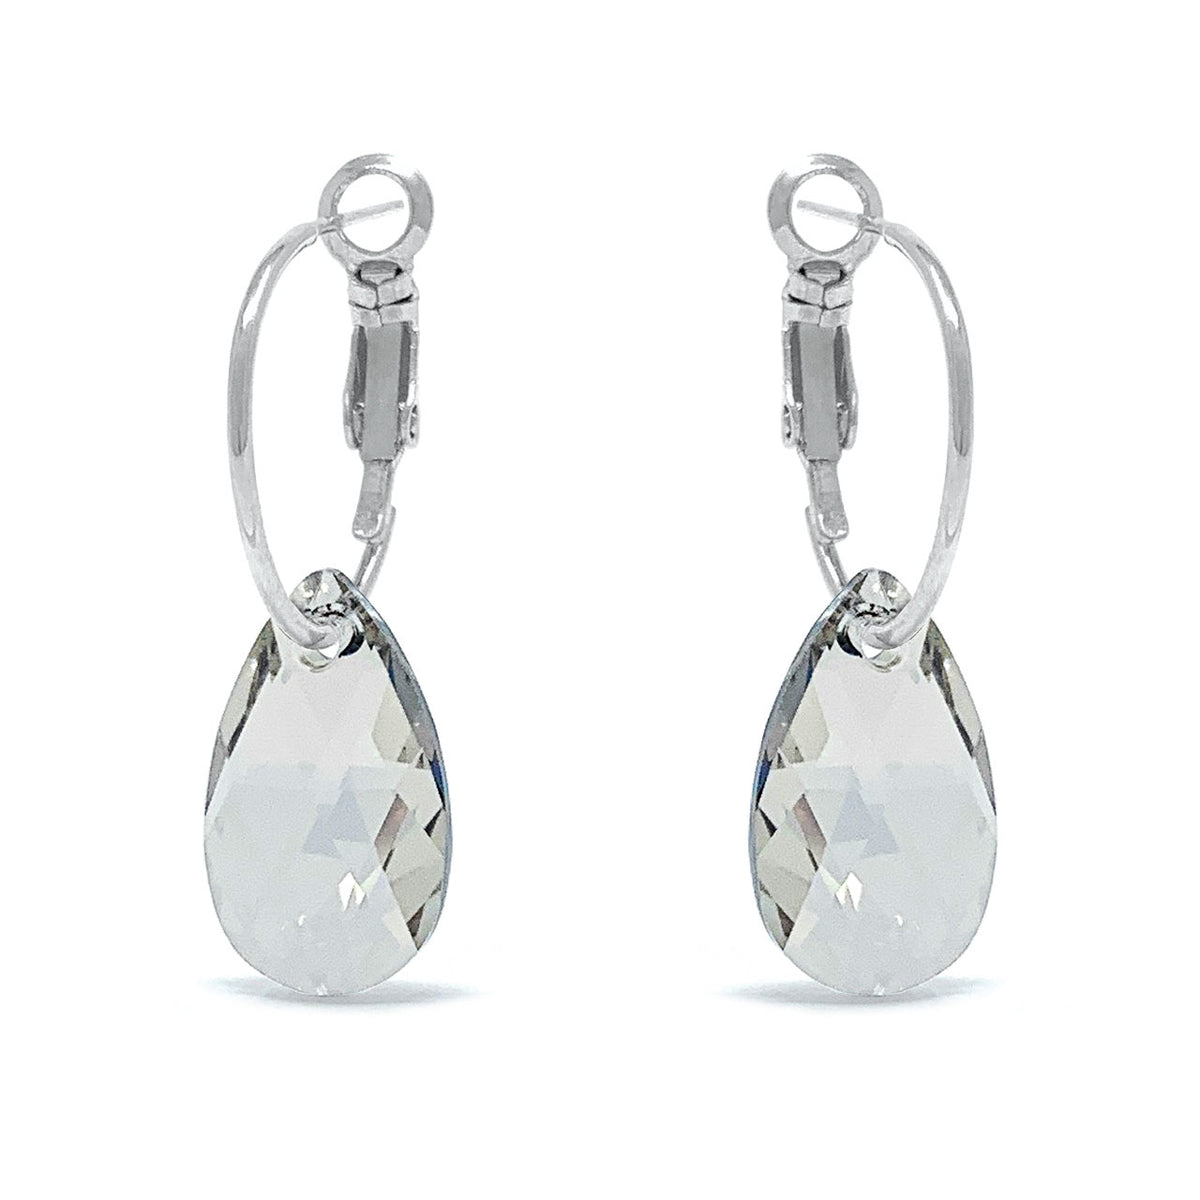 Aurora Small Drop Earrings with Grey Silver Shade Pear Crystals from Swarovski Silver Toned Rhodium Plated - Ed Heart